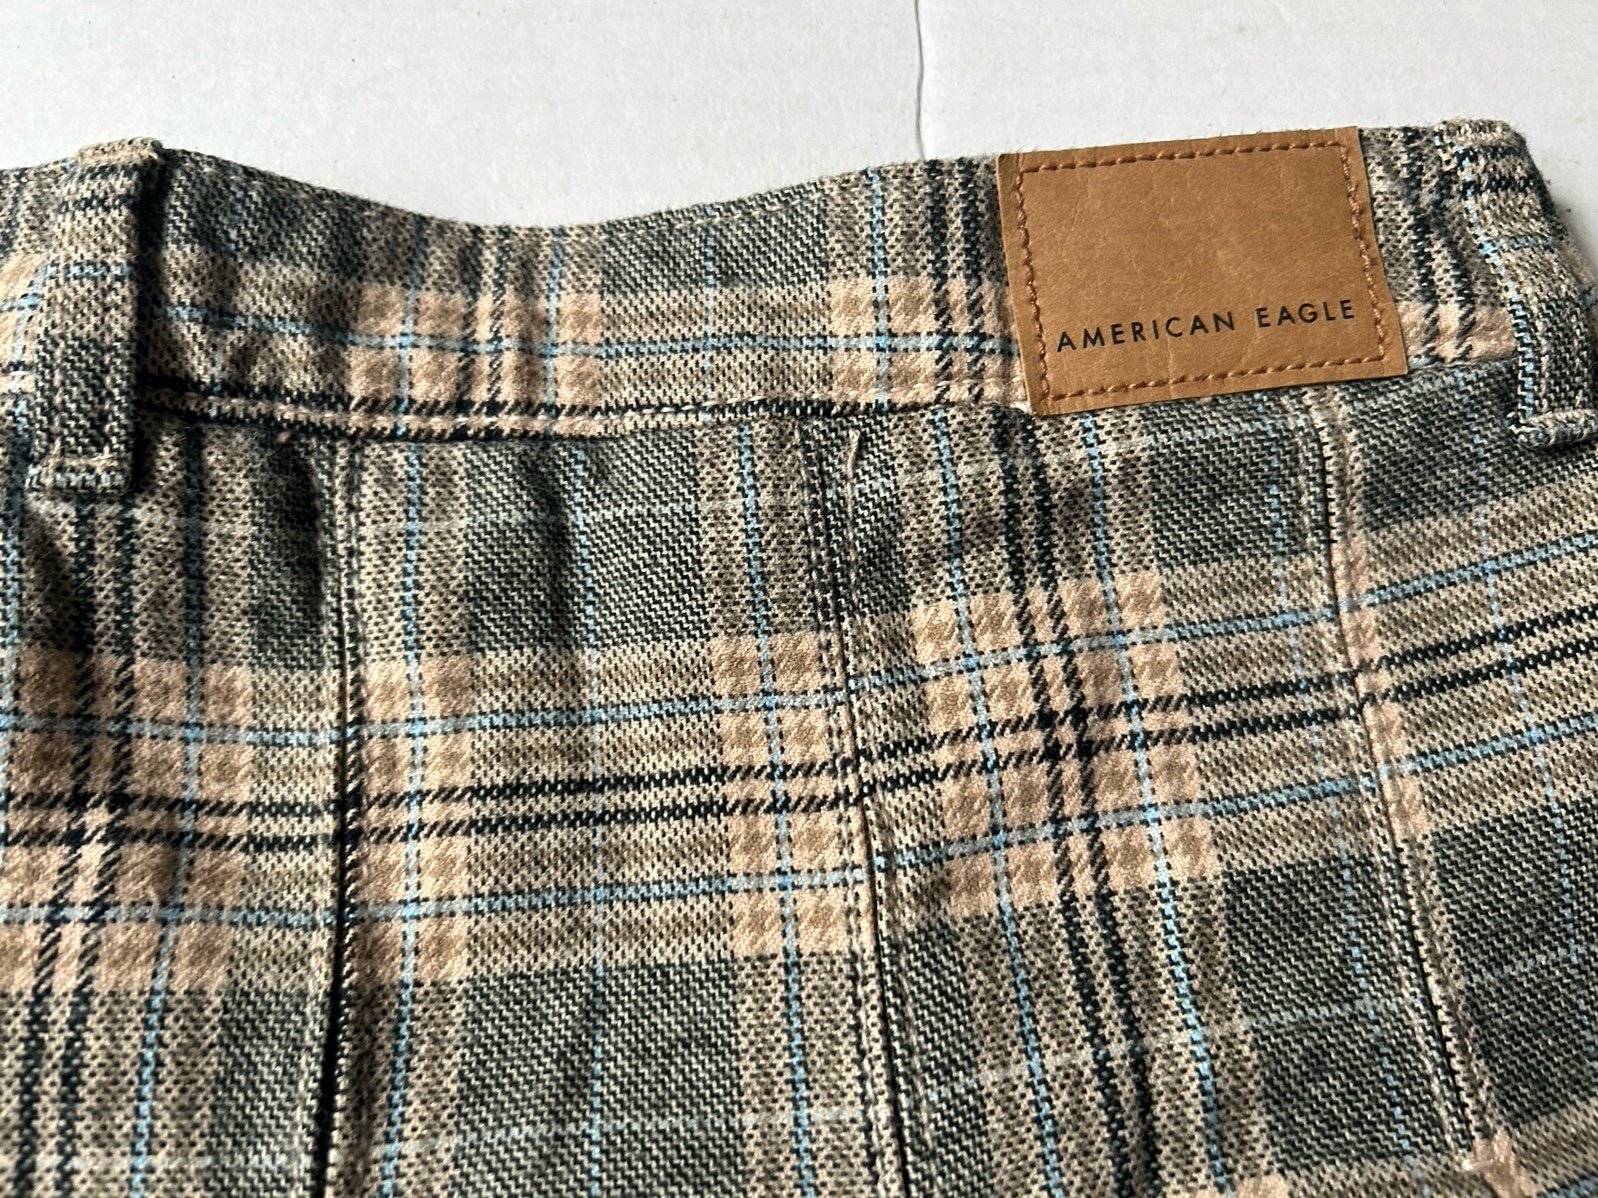 large discount NWT American Eagle Low Rise Pleated skirt Plaid size 10 jWq2vqLPw for sale